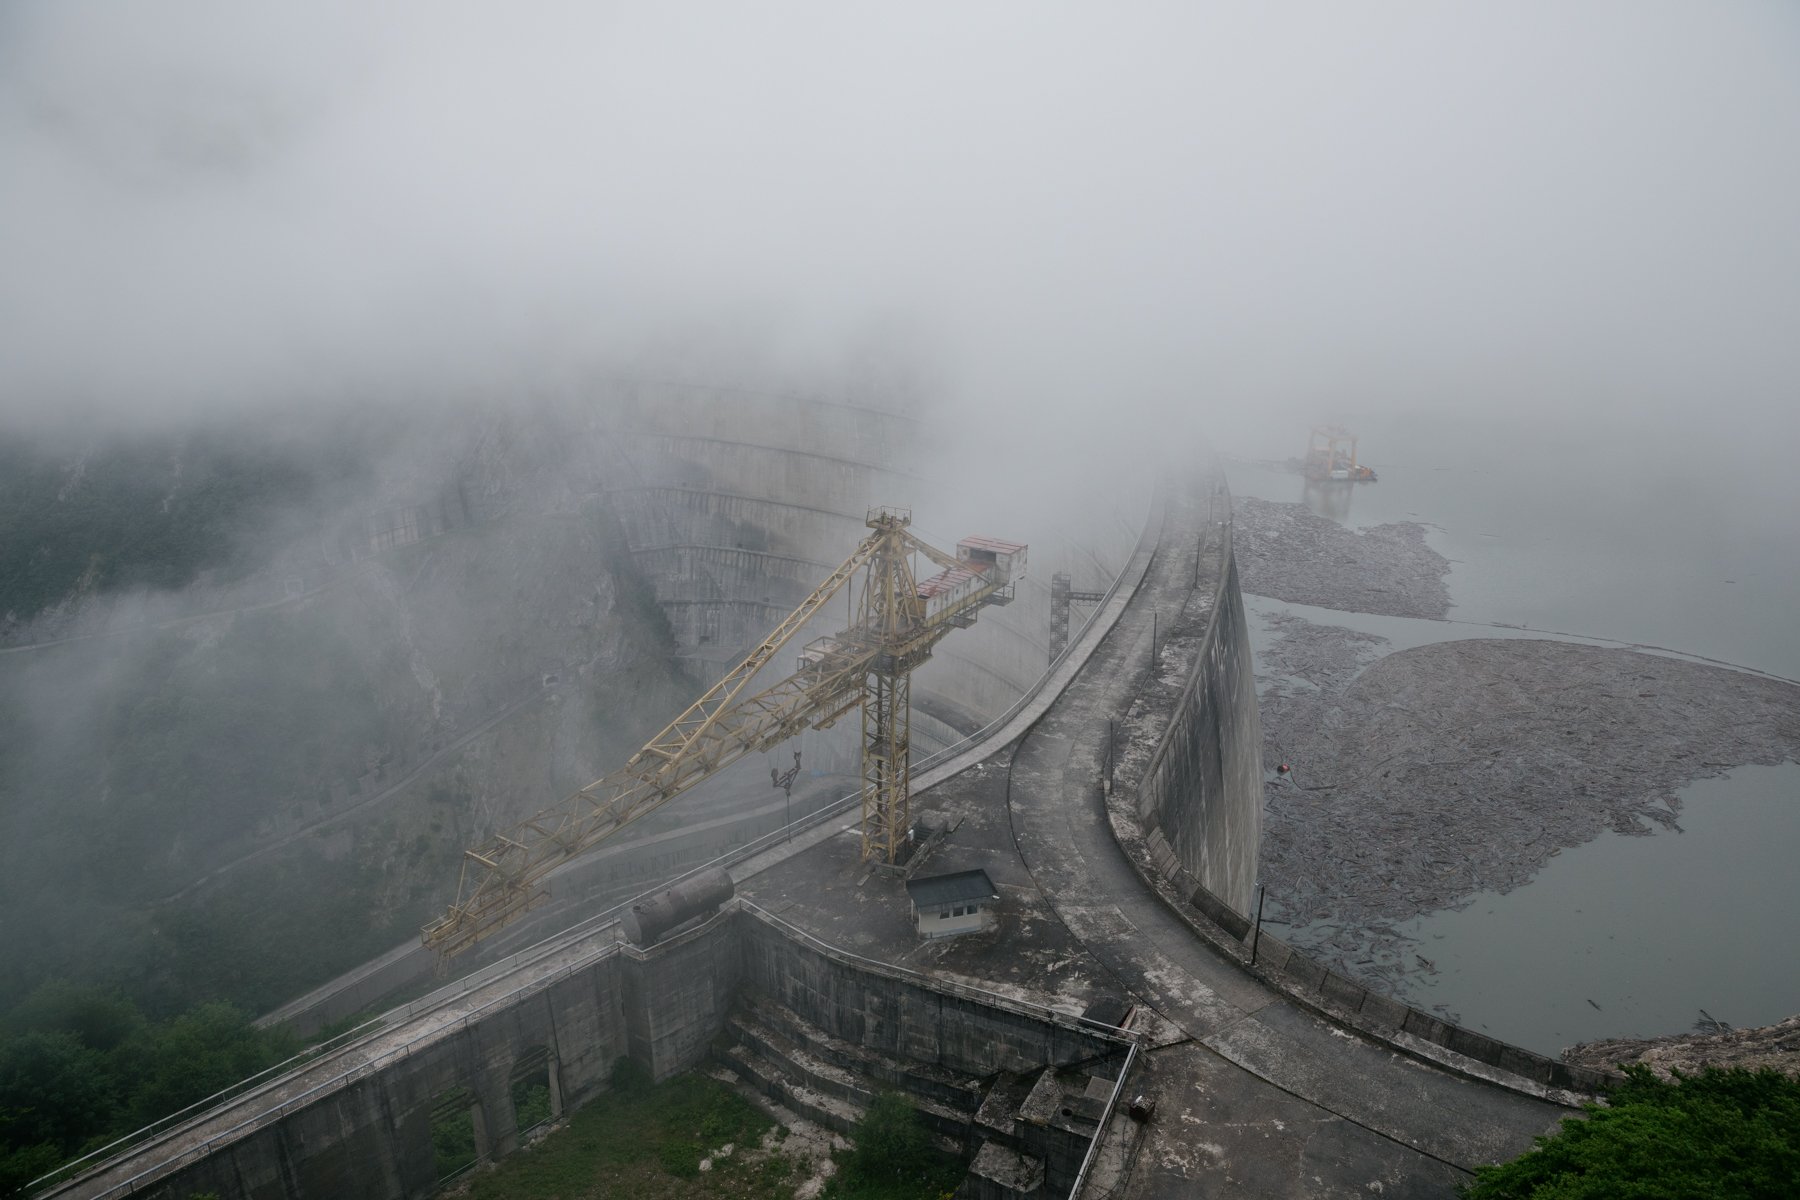  The 270 metre Enguri Dam redirects water from the Enguri River to hydroelectric power plants located in occupied Abkhazia. The resulting electricity is shared equally between Abkhazia and Georgian-controlled territory. 